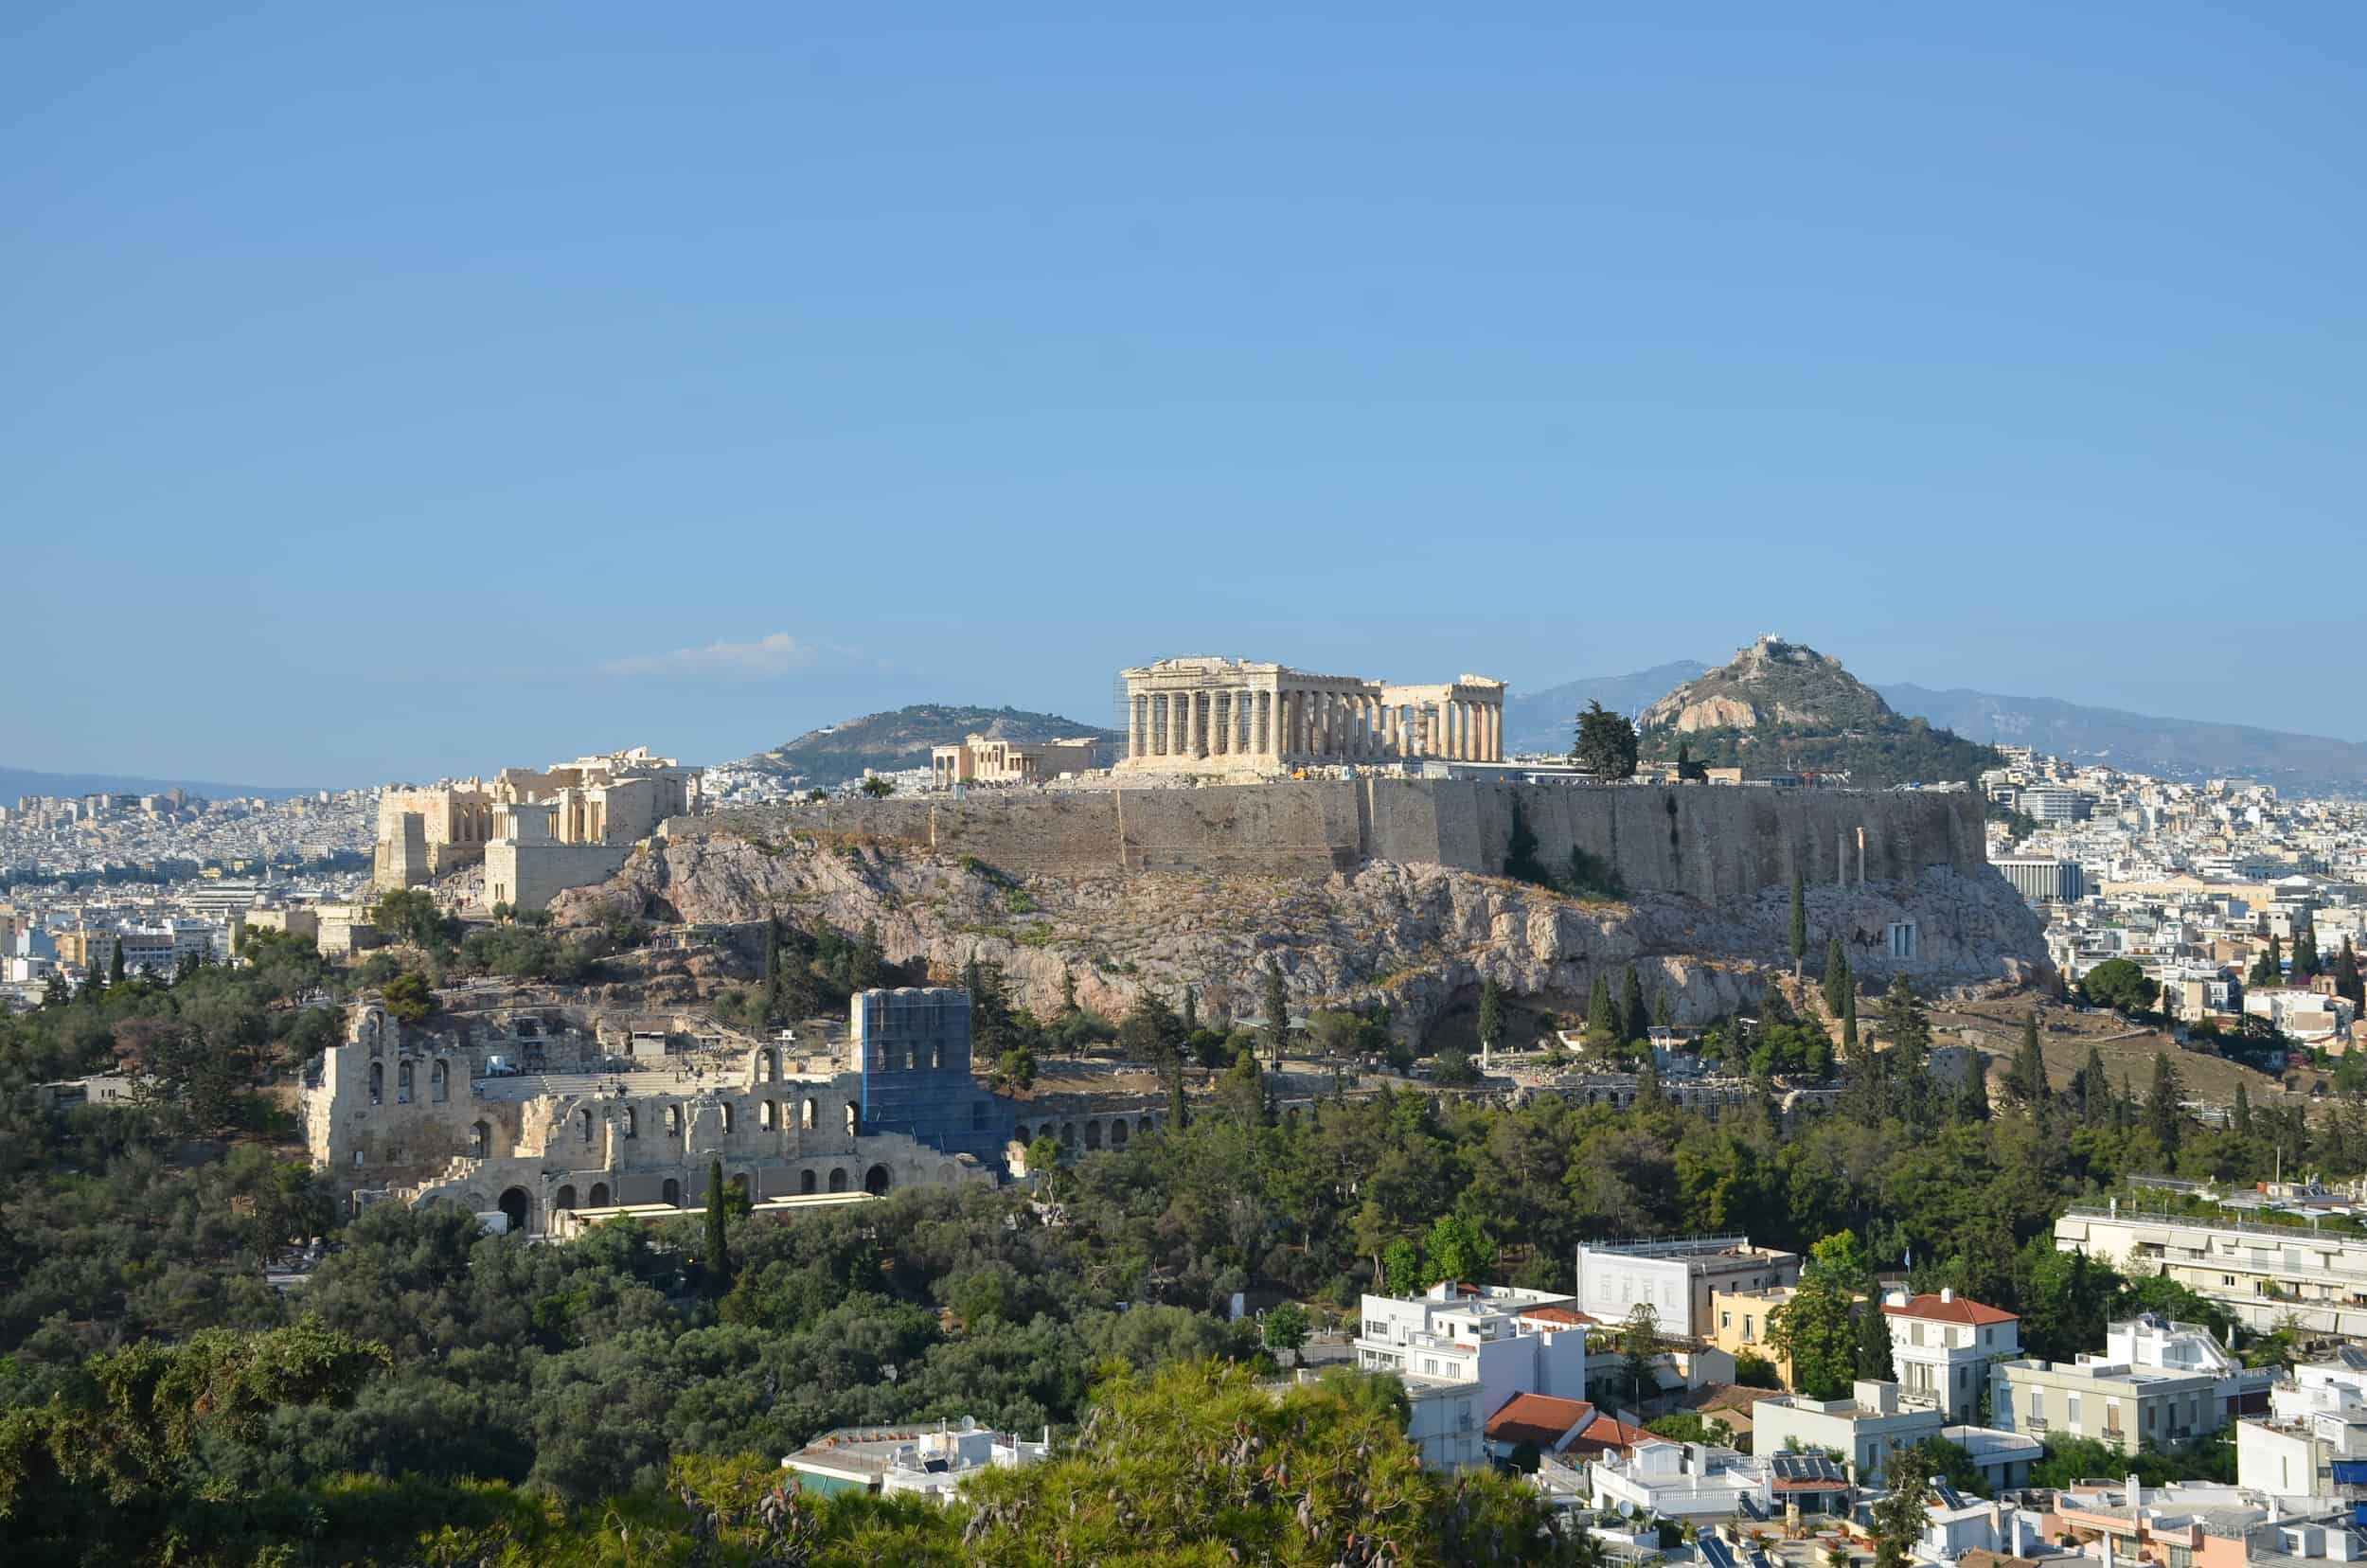 View of the Acropolis from the Hill of the Muses (Philopappos Hill) in Athens, Greece